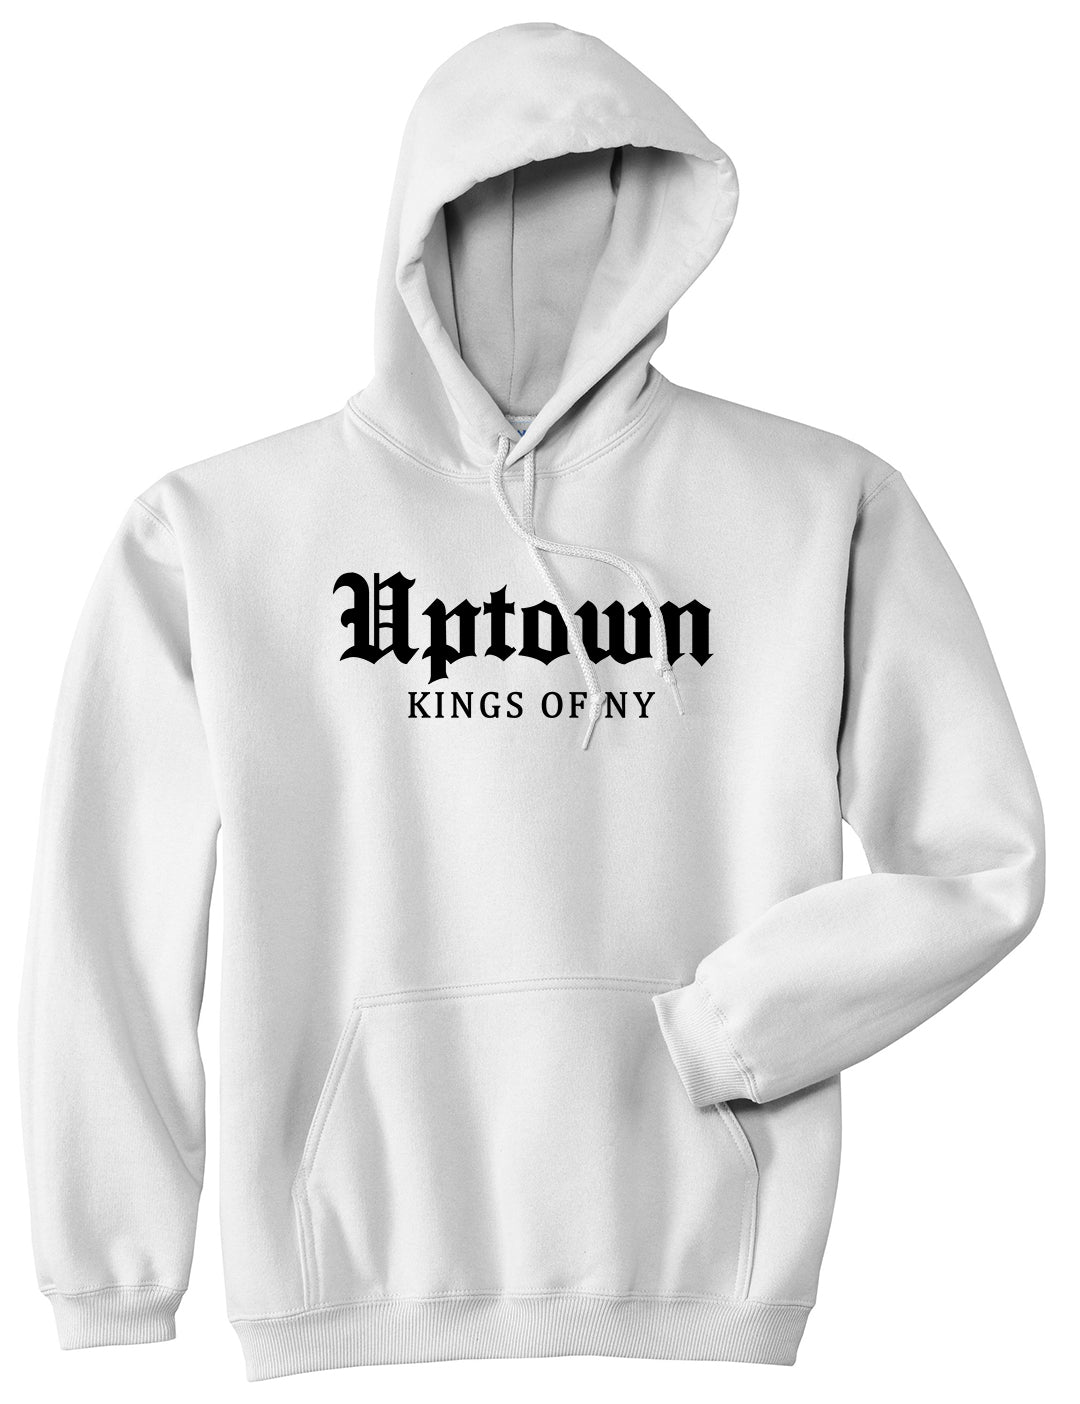 Uptown Old English Mens Pullover Hoodie White by Kings Of NY